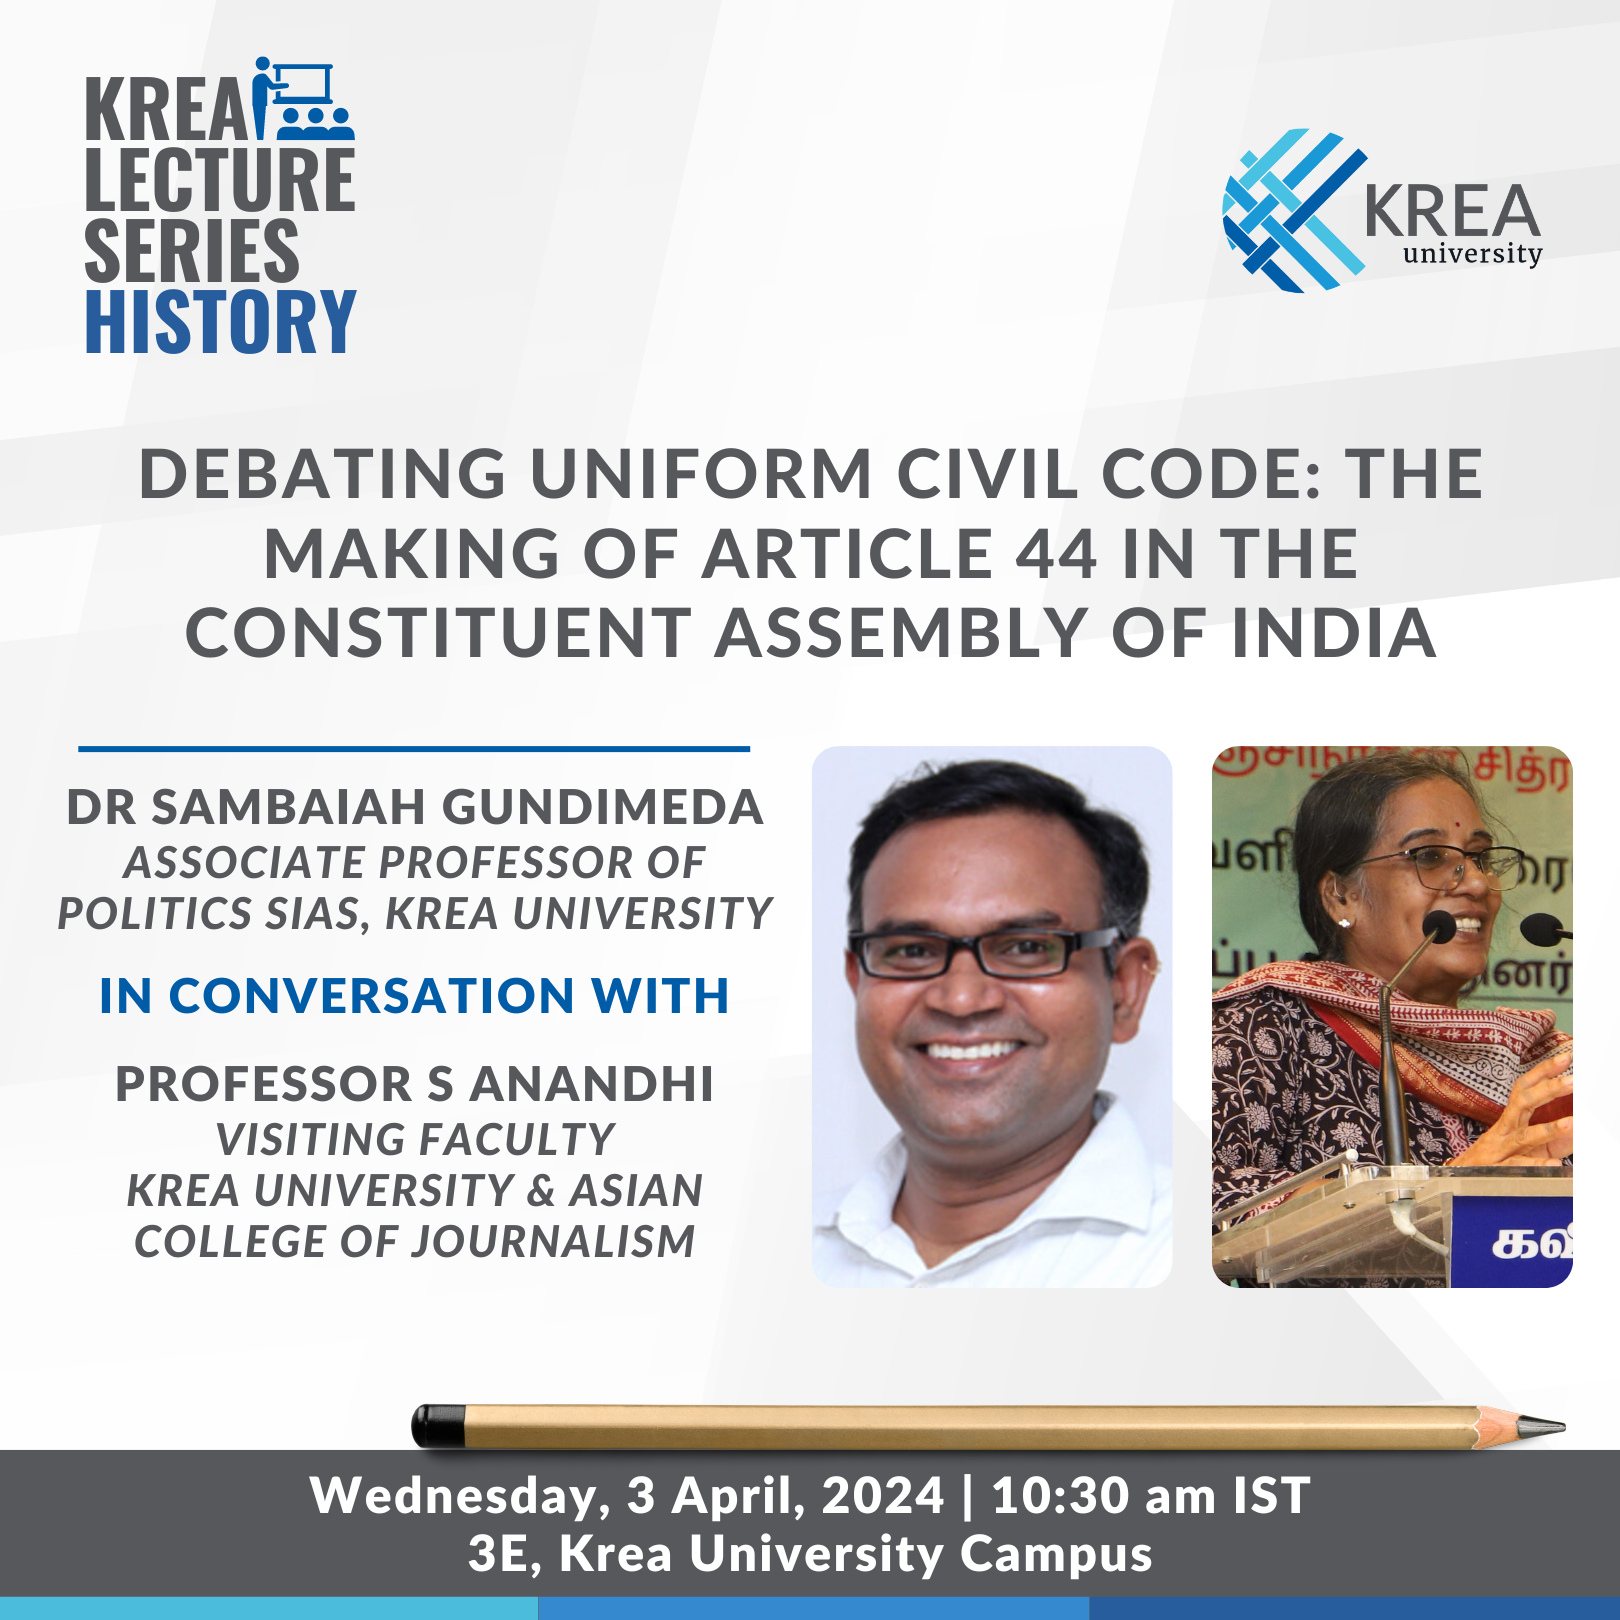 Debating Uniform Civil Code: The Making of Article 44 in the Constituent Assembly of India – Dr Sambaiah Gundimeda in conversation with Professor S Anandhi